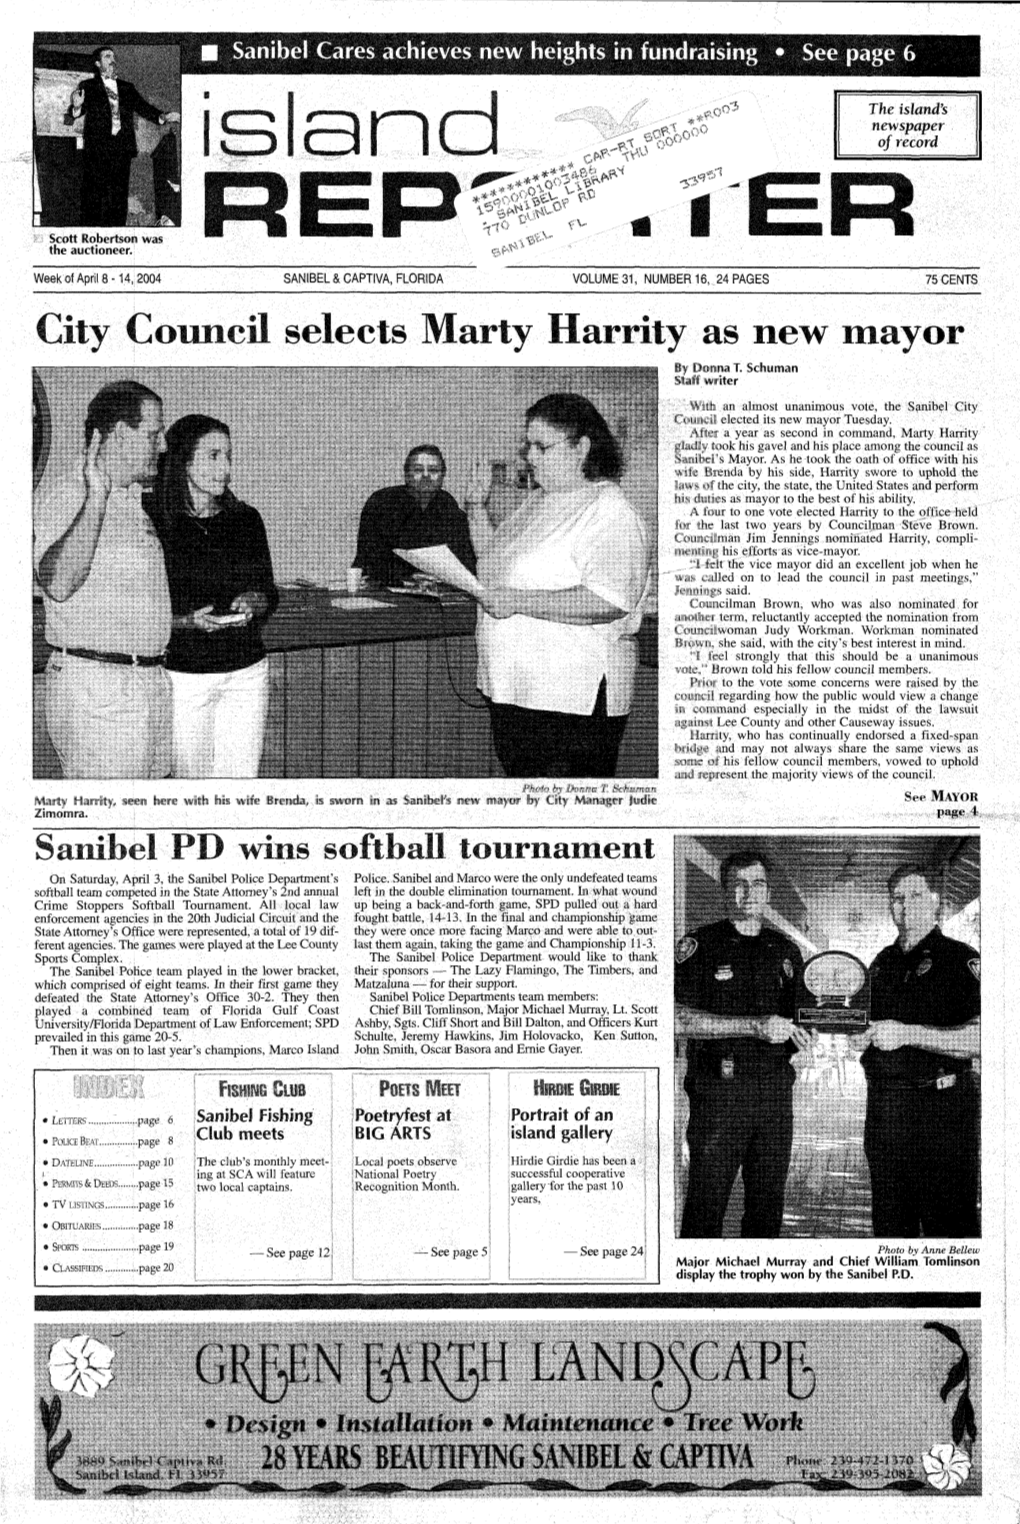 City Council Selects Marty Harrity As New Mayor by Donna T